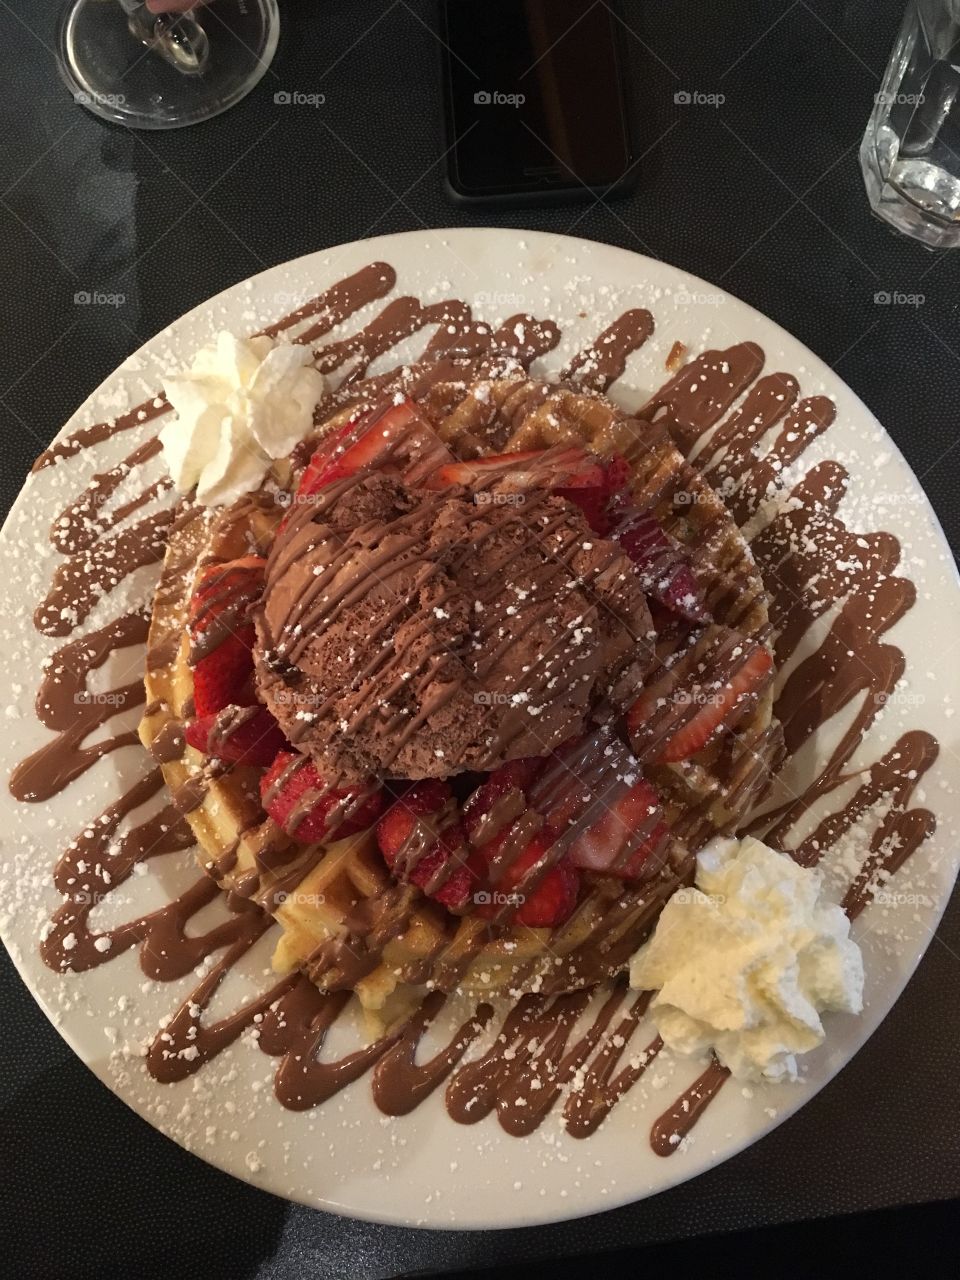 A delicious Nutella waffle accompanied with strawberries and whipped cream.